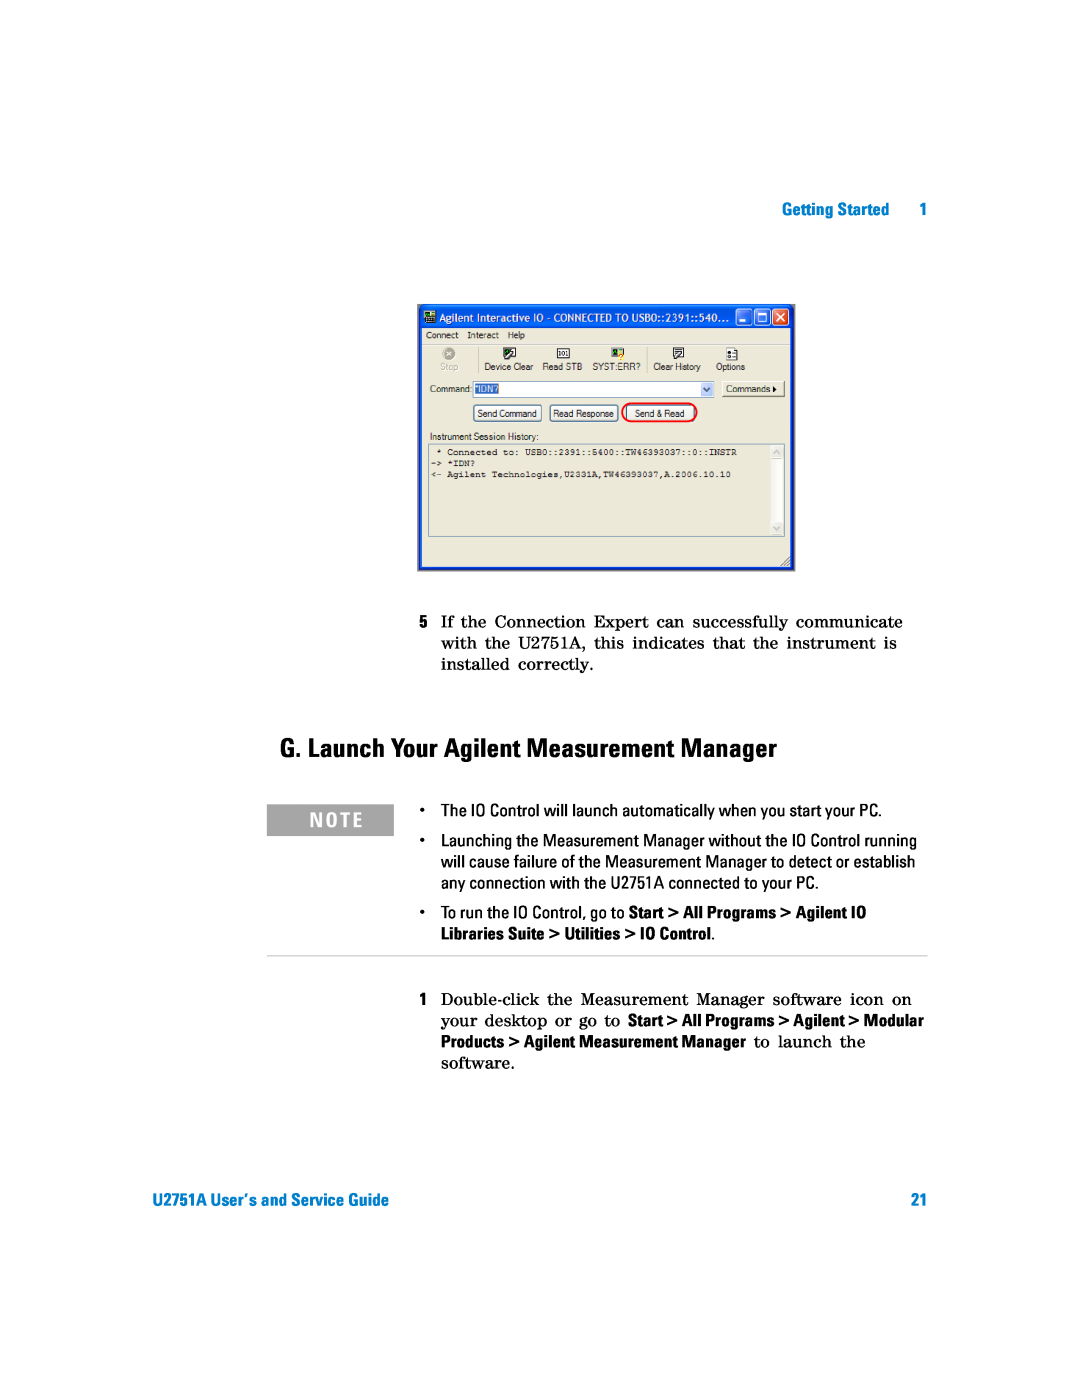 Agilent Technologies manual G. Launch Your Agilent Measurement Manager, N O T E, U2751A User’s and Service Guide 